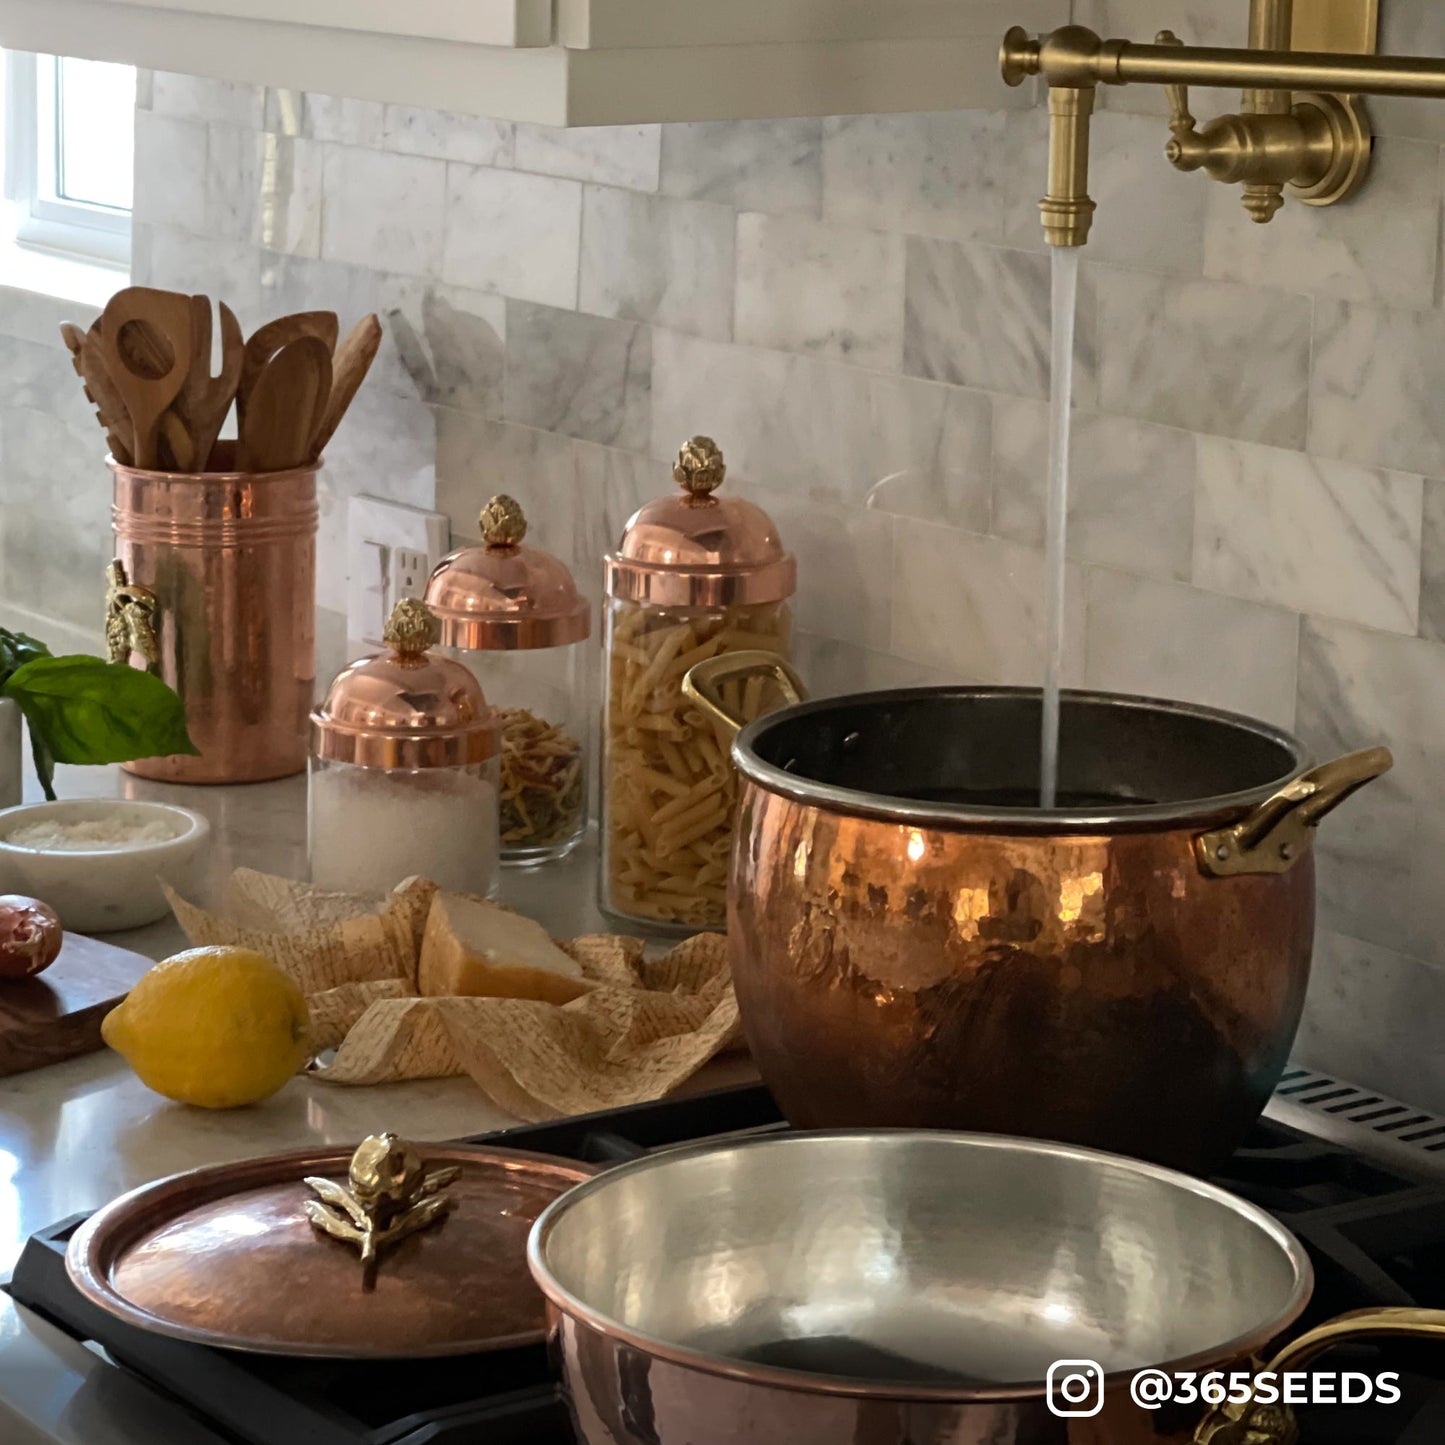 Hammered copper Stockpot lined with high purity tin applied by hand over fire and bronze handles, from Ruffoni Historia collection